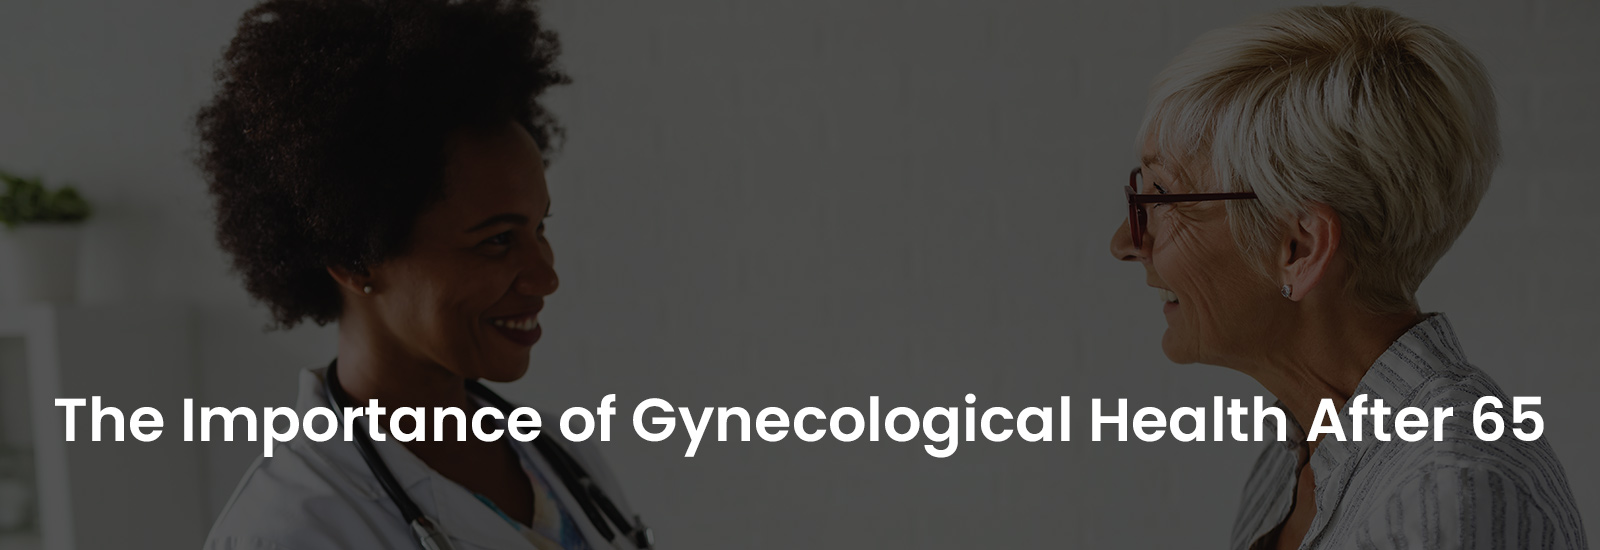 The Importance of Gynecological Health After 65 | Banner Image